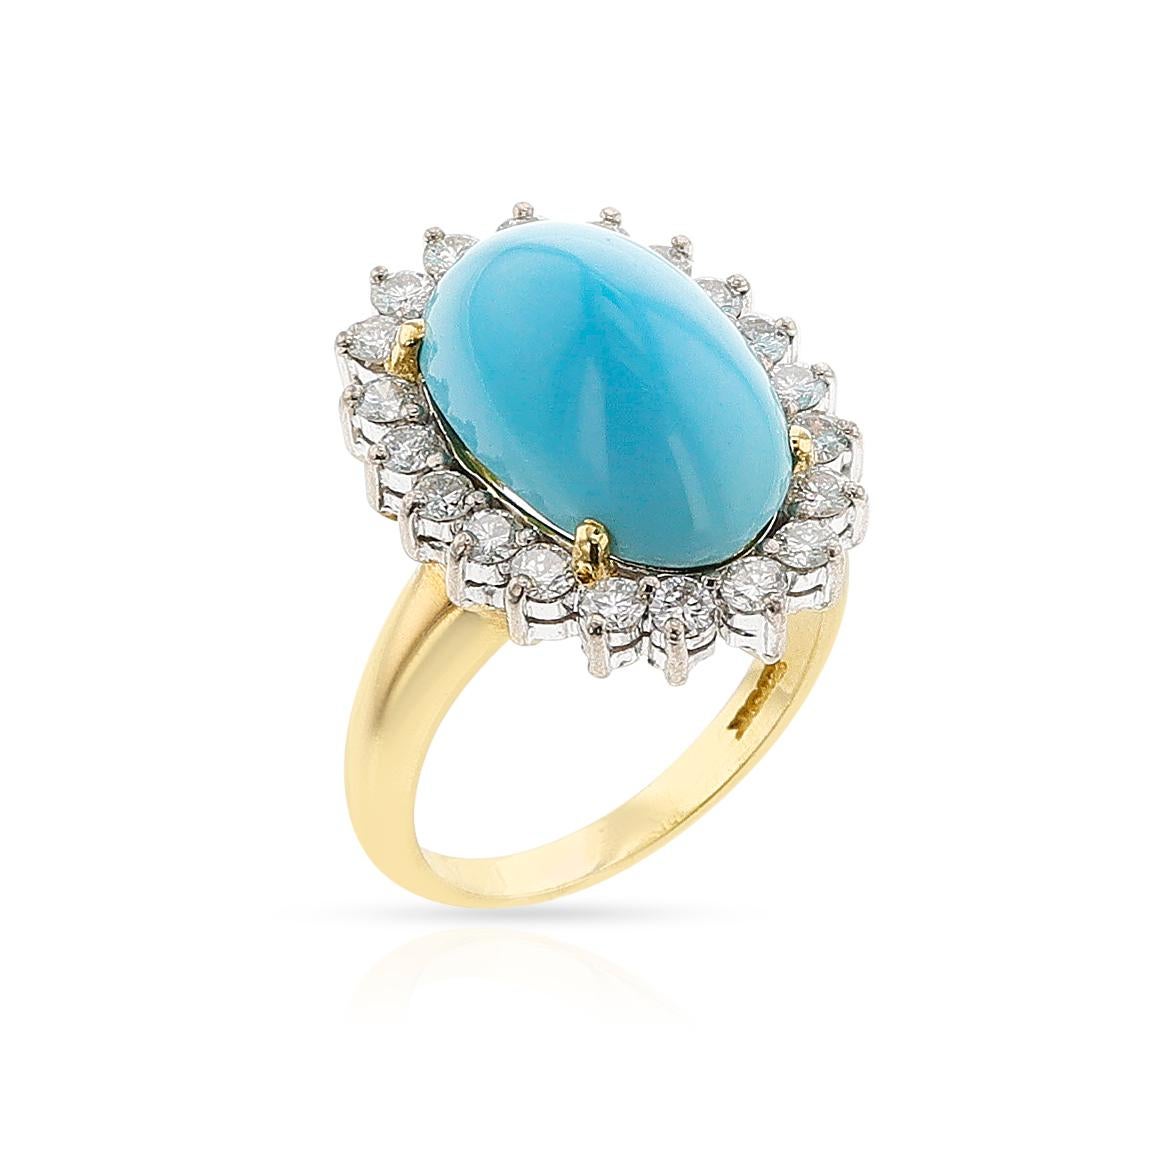 An Oval Turquoise Cabochon and Diamond Ring made in 18k Yellow Gold. The ring is 7.85 grams. The diamond weight is appx. 0.70 ct. H-I color, VS-SI clarity. The ring size is 5 1/2. The turquoise measures 15 x 9.5 x 8 mm,



1491-IBERTRT